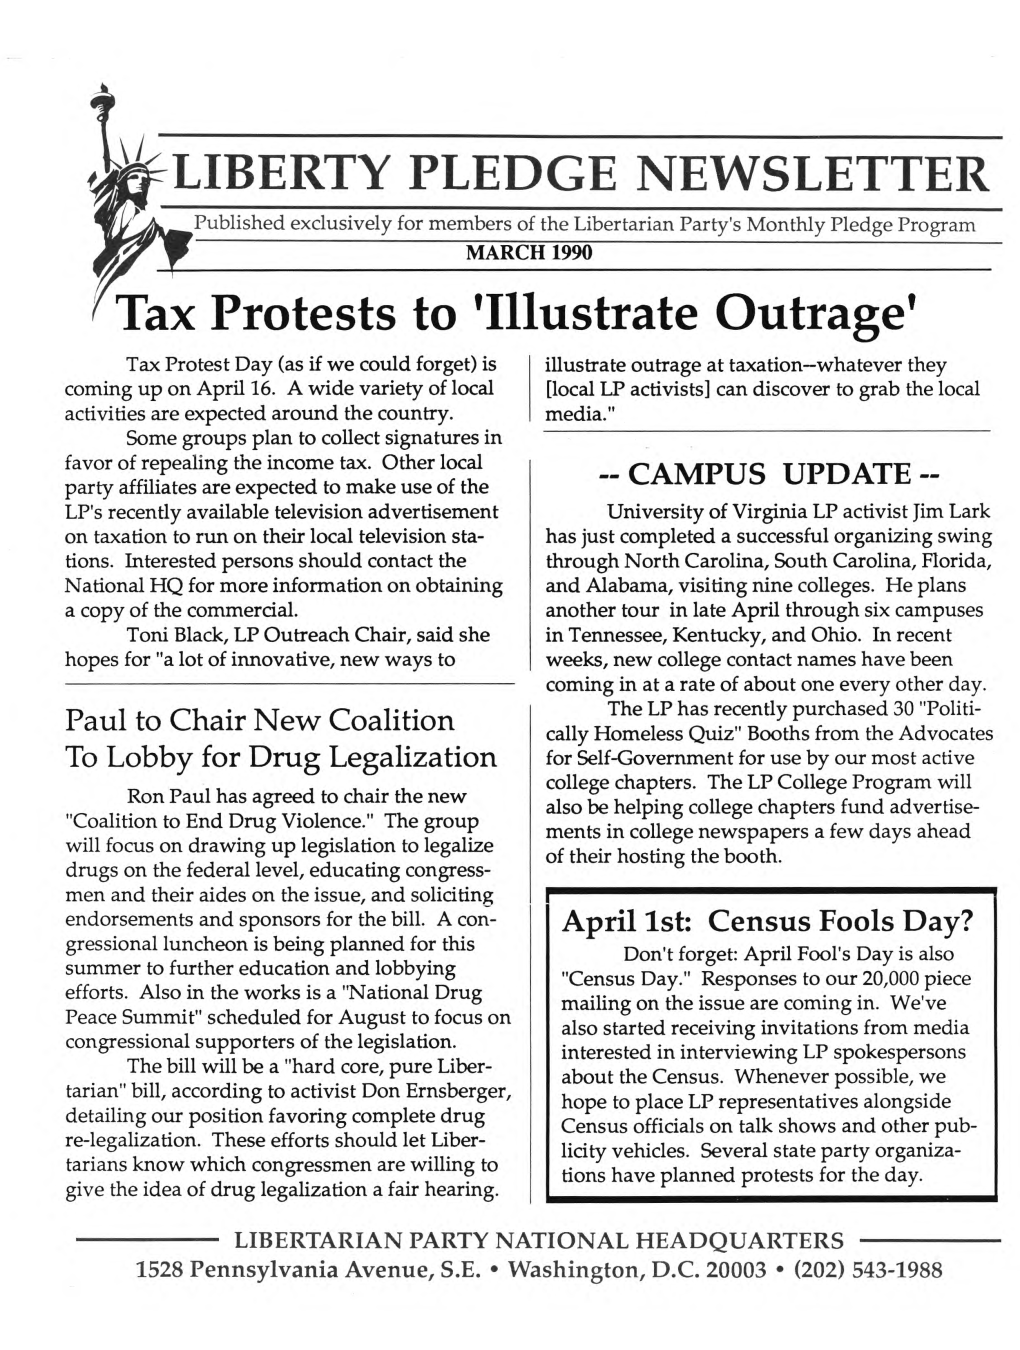 LIBERTY PLEDGE NEWSLETTER Tax Protests to 'Illustrate